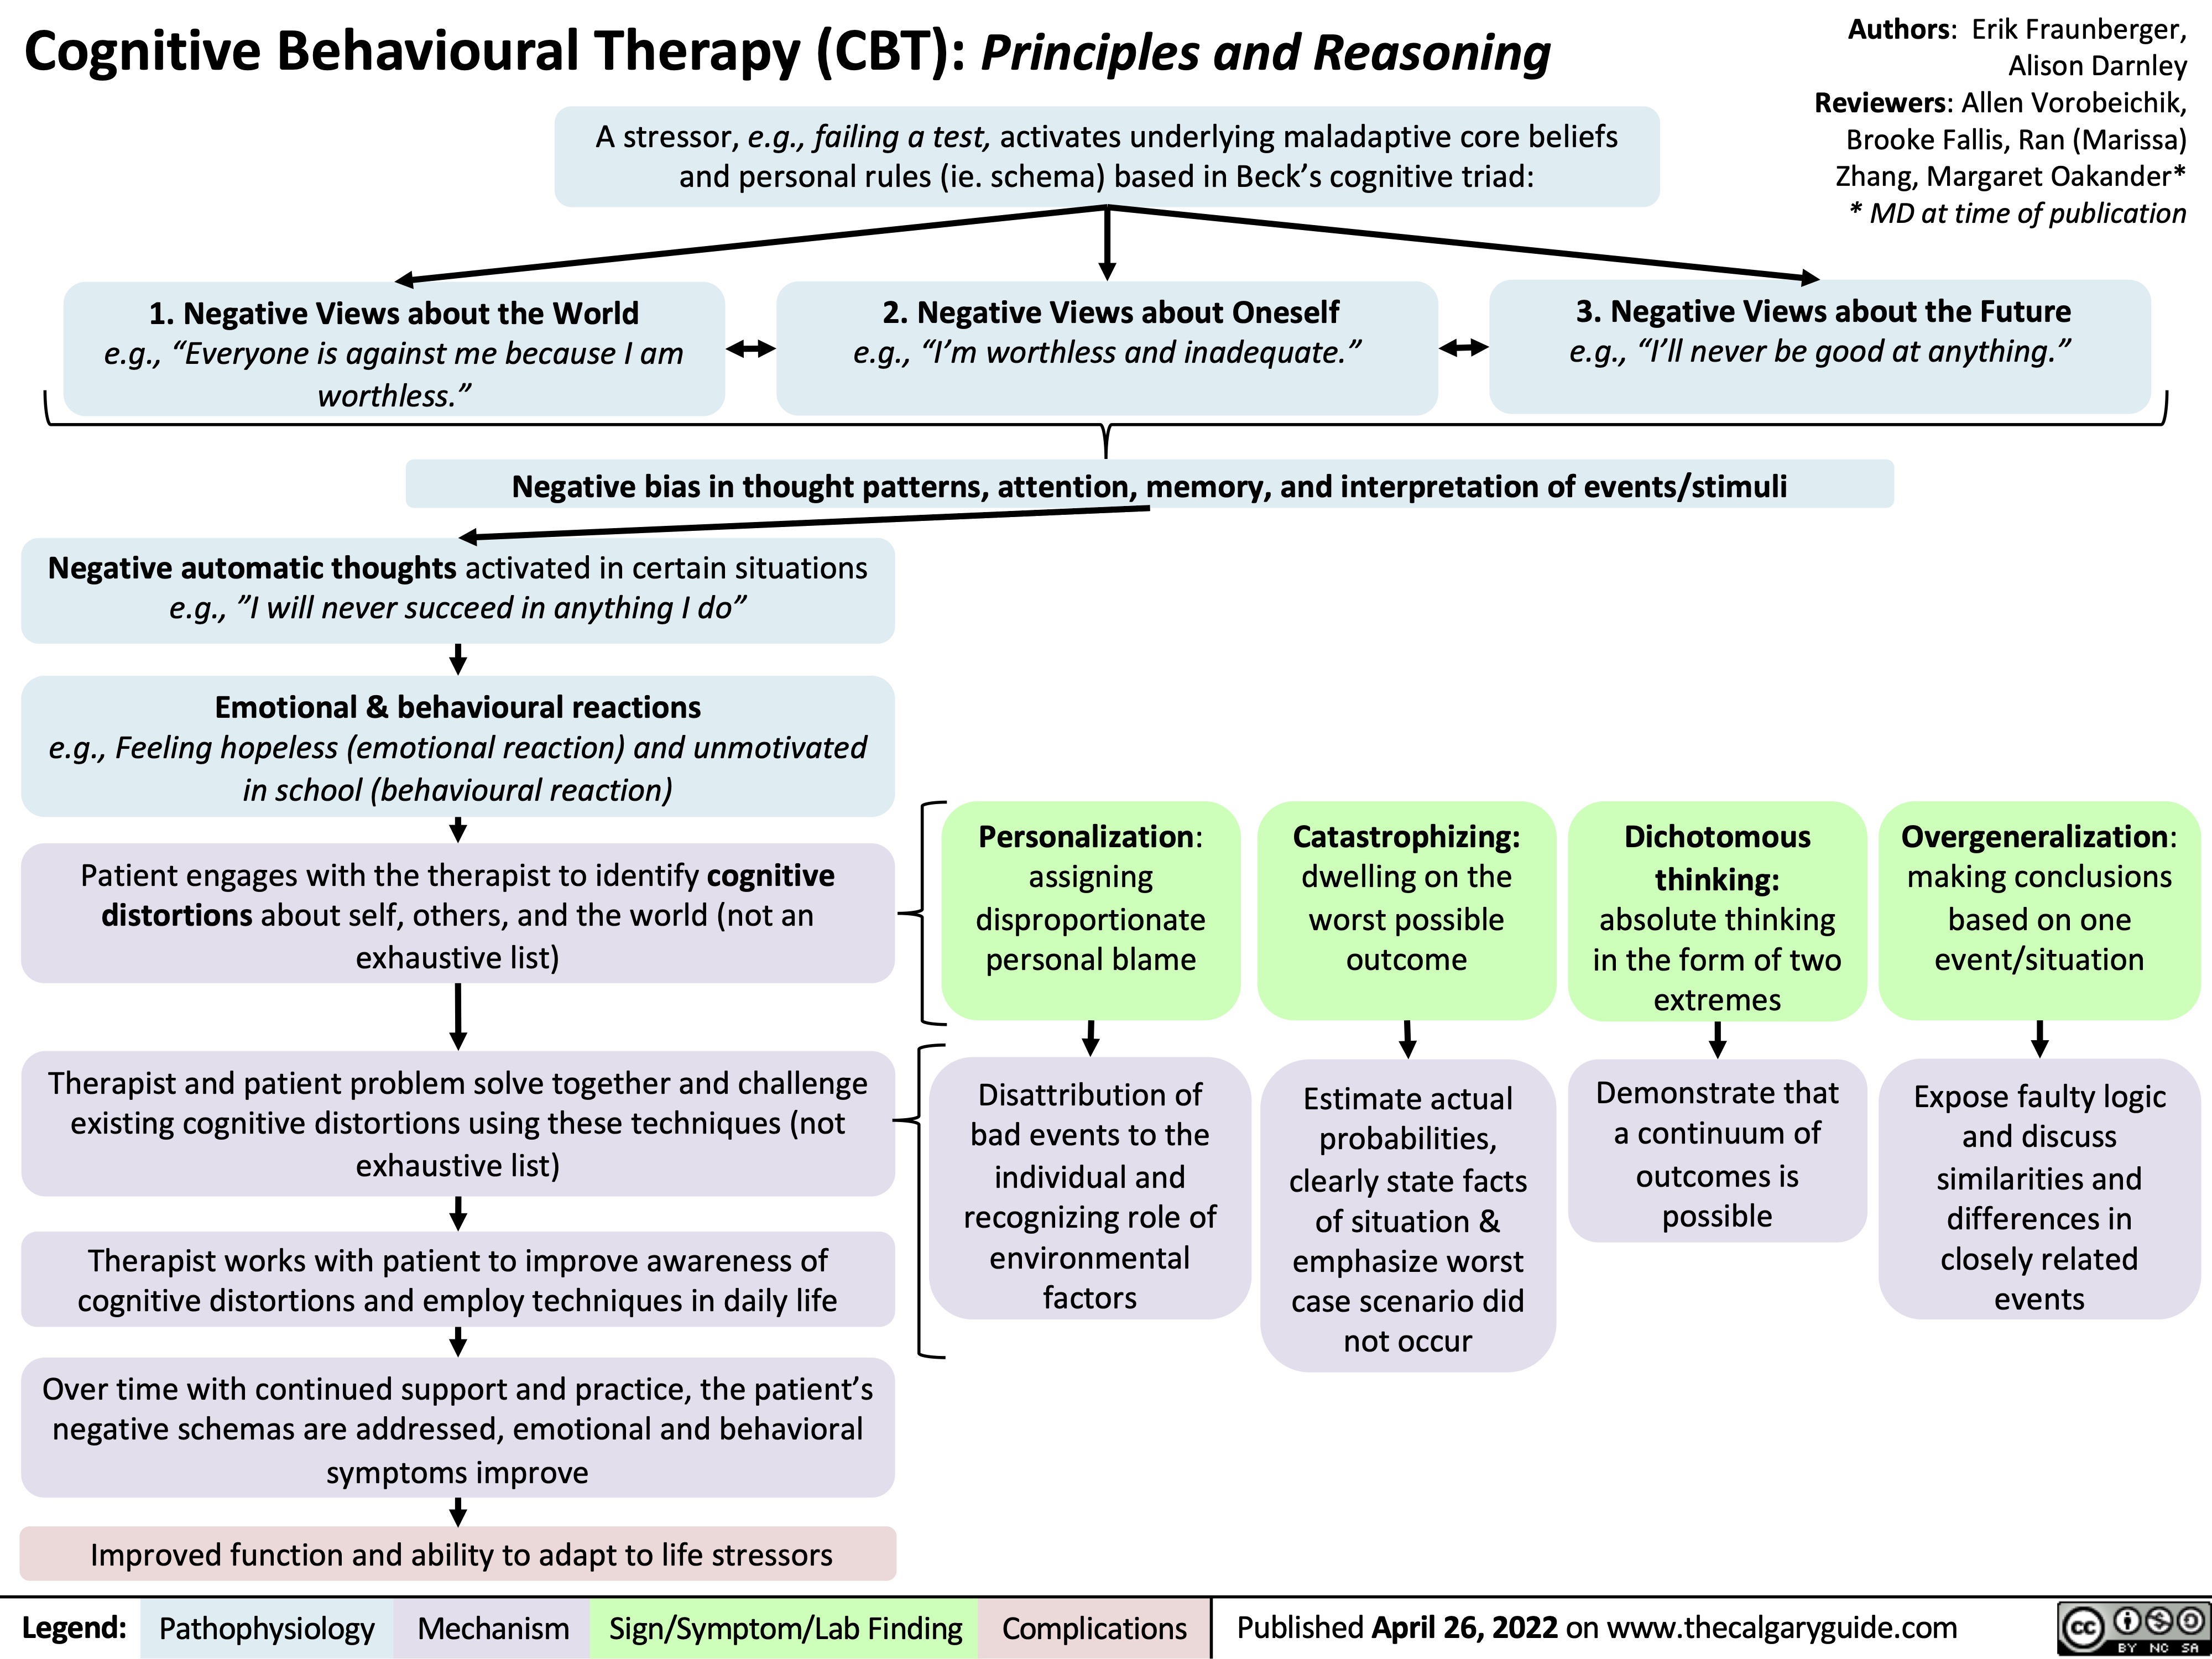 Cognitive Behavioural Therapy (CBT): Principles and Reasoning
A stressor, e.g., failing a test, activates underlying maladaptive core beliefs
and personal rules (ie. schema) based in Beck’s cognitive triad:
1. Negative Views about the World 2. Negative Views about Oneself
e.g., “Everyone is against me because I am e.g., “I’m worthless and inadequate.” worthless.”
Authors: Erik Fraunberger, Alison Darnley Reviewers: Allen Vorobeichik, Brooke Fallis, Ran (Marissa) Zhang, Margaret Oakander* * MD at time of publication
      3. Negative Views about the Future
e.g., “I’ll never be good at anything.”
  Negative bias in thought patterns, attention, memory, and interpretation of events/stimuli
  Negative automatic thoughts activated in certain situations e.g., ”I will never succeed in anything I do”
Emotional & behavioural reactions
e.g., Feeling hopeless (emotional reaction) and unmotivated in school (behavioural reaction)
Patient engages with the therapist to identify cognitive distortions about self, others, and the world (not an exhaustive list)
Therapist and patient problem solve together and challenge existing cognitive distortions using these techniques (not exhaustive list)
Therapist works with patient to improve awareness of cognitive distortions and employ techniques in daily life
Over time with continued support and practice, the patient’s negative schemas are addressed, emotional and behavioral symptoms improve
Personalization: assigning disproportionate personal blame
Disattribution of bad events to the individual and recognizing role of environmental factors
Catastrophizing:
dwelling on the worst possible outcome
Estimate actual probabilities, clearly state facts of situation & emphasize worst case scenario did not occur
Dichotomous thinking: absolute thinking in the form of two extremes
Demonstrate that a continuum of outcomes is possible
Overgeneralization: making conclusions based on one event/situation
Expose faulty logic and discuss similarities and differences in closely related events
                Improved function and ability to adapt to life stressors
 Legend:
 Pathophysiology
Mechanism
 Sign/Symptom/Lab Finding
 Complications
 Published April 26, 2022 on www.thecalgaryguide.com
  